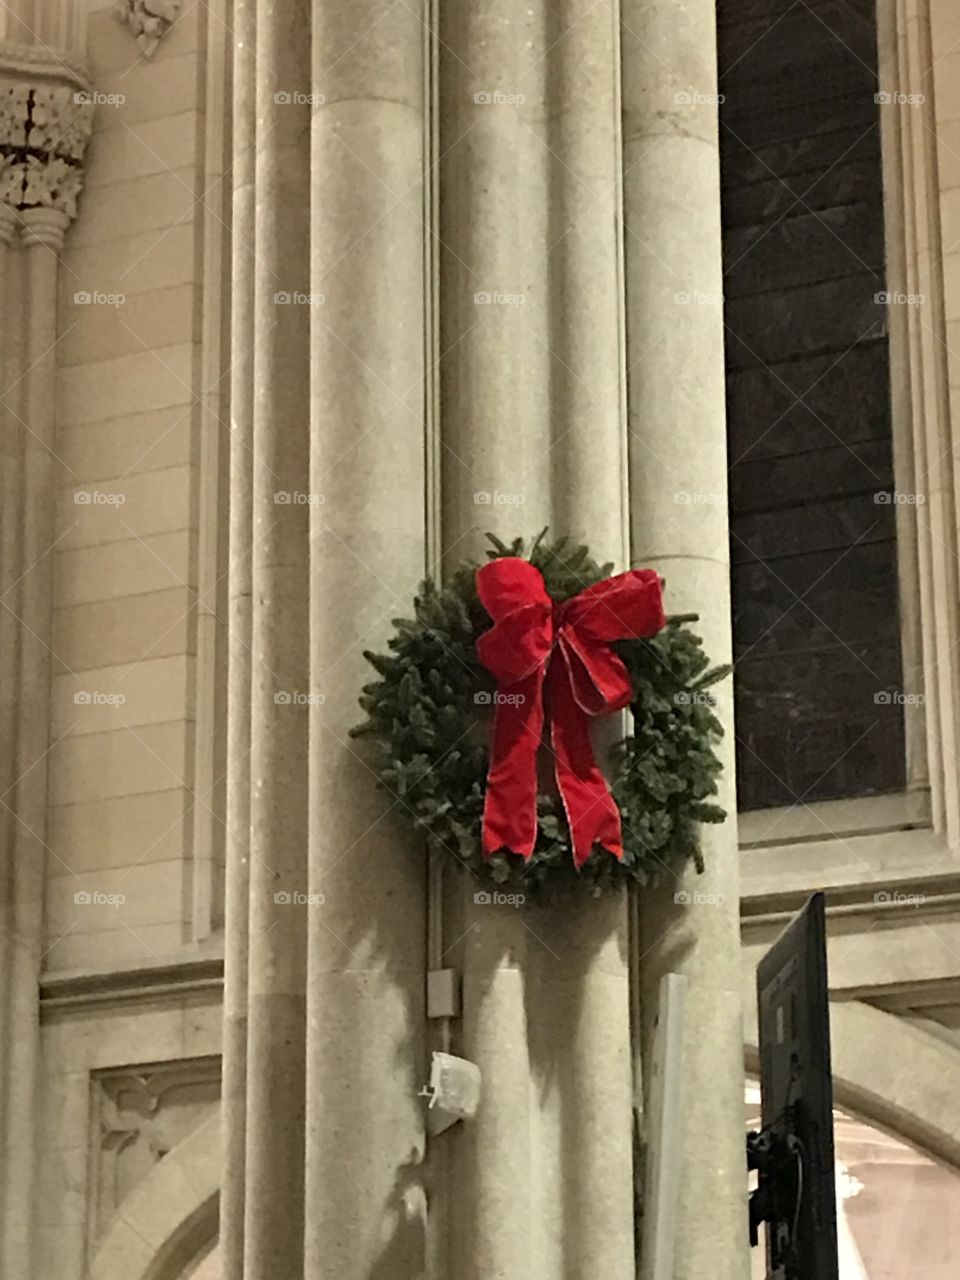 St Patrick’s Cathedral Christmastime NYC